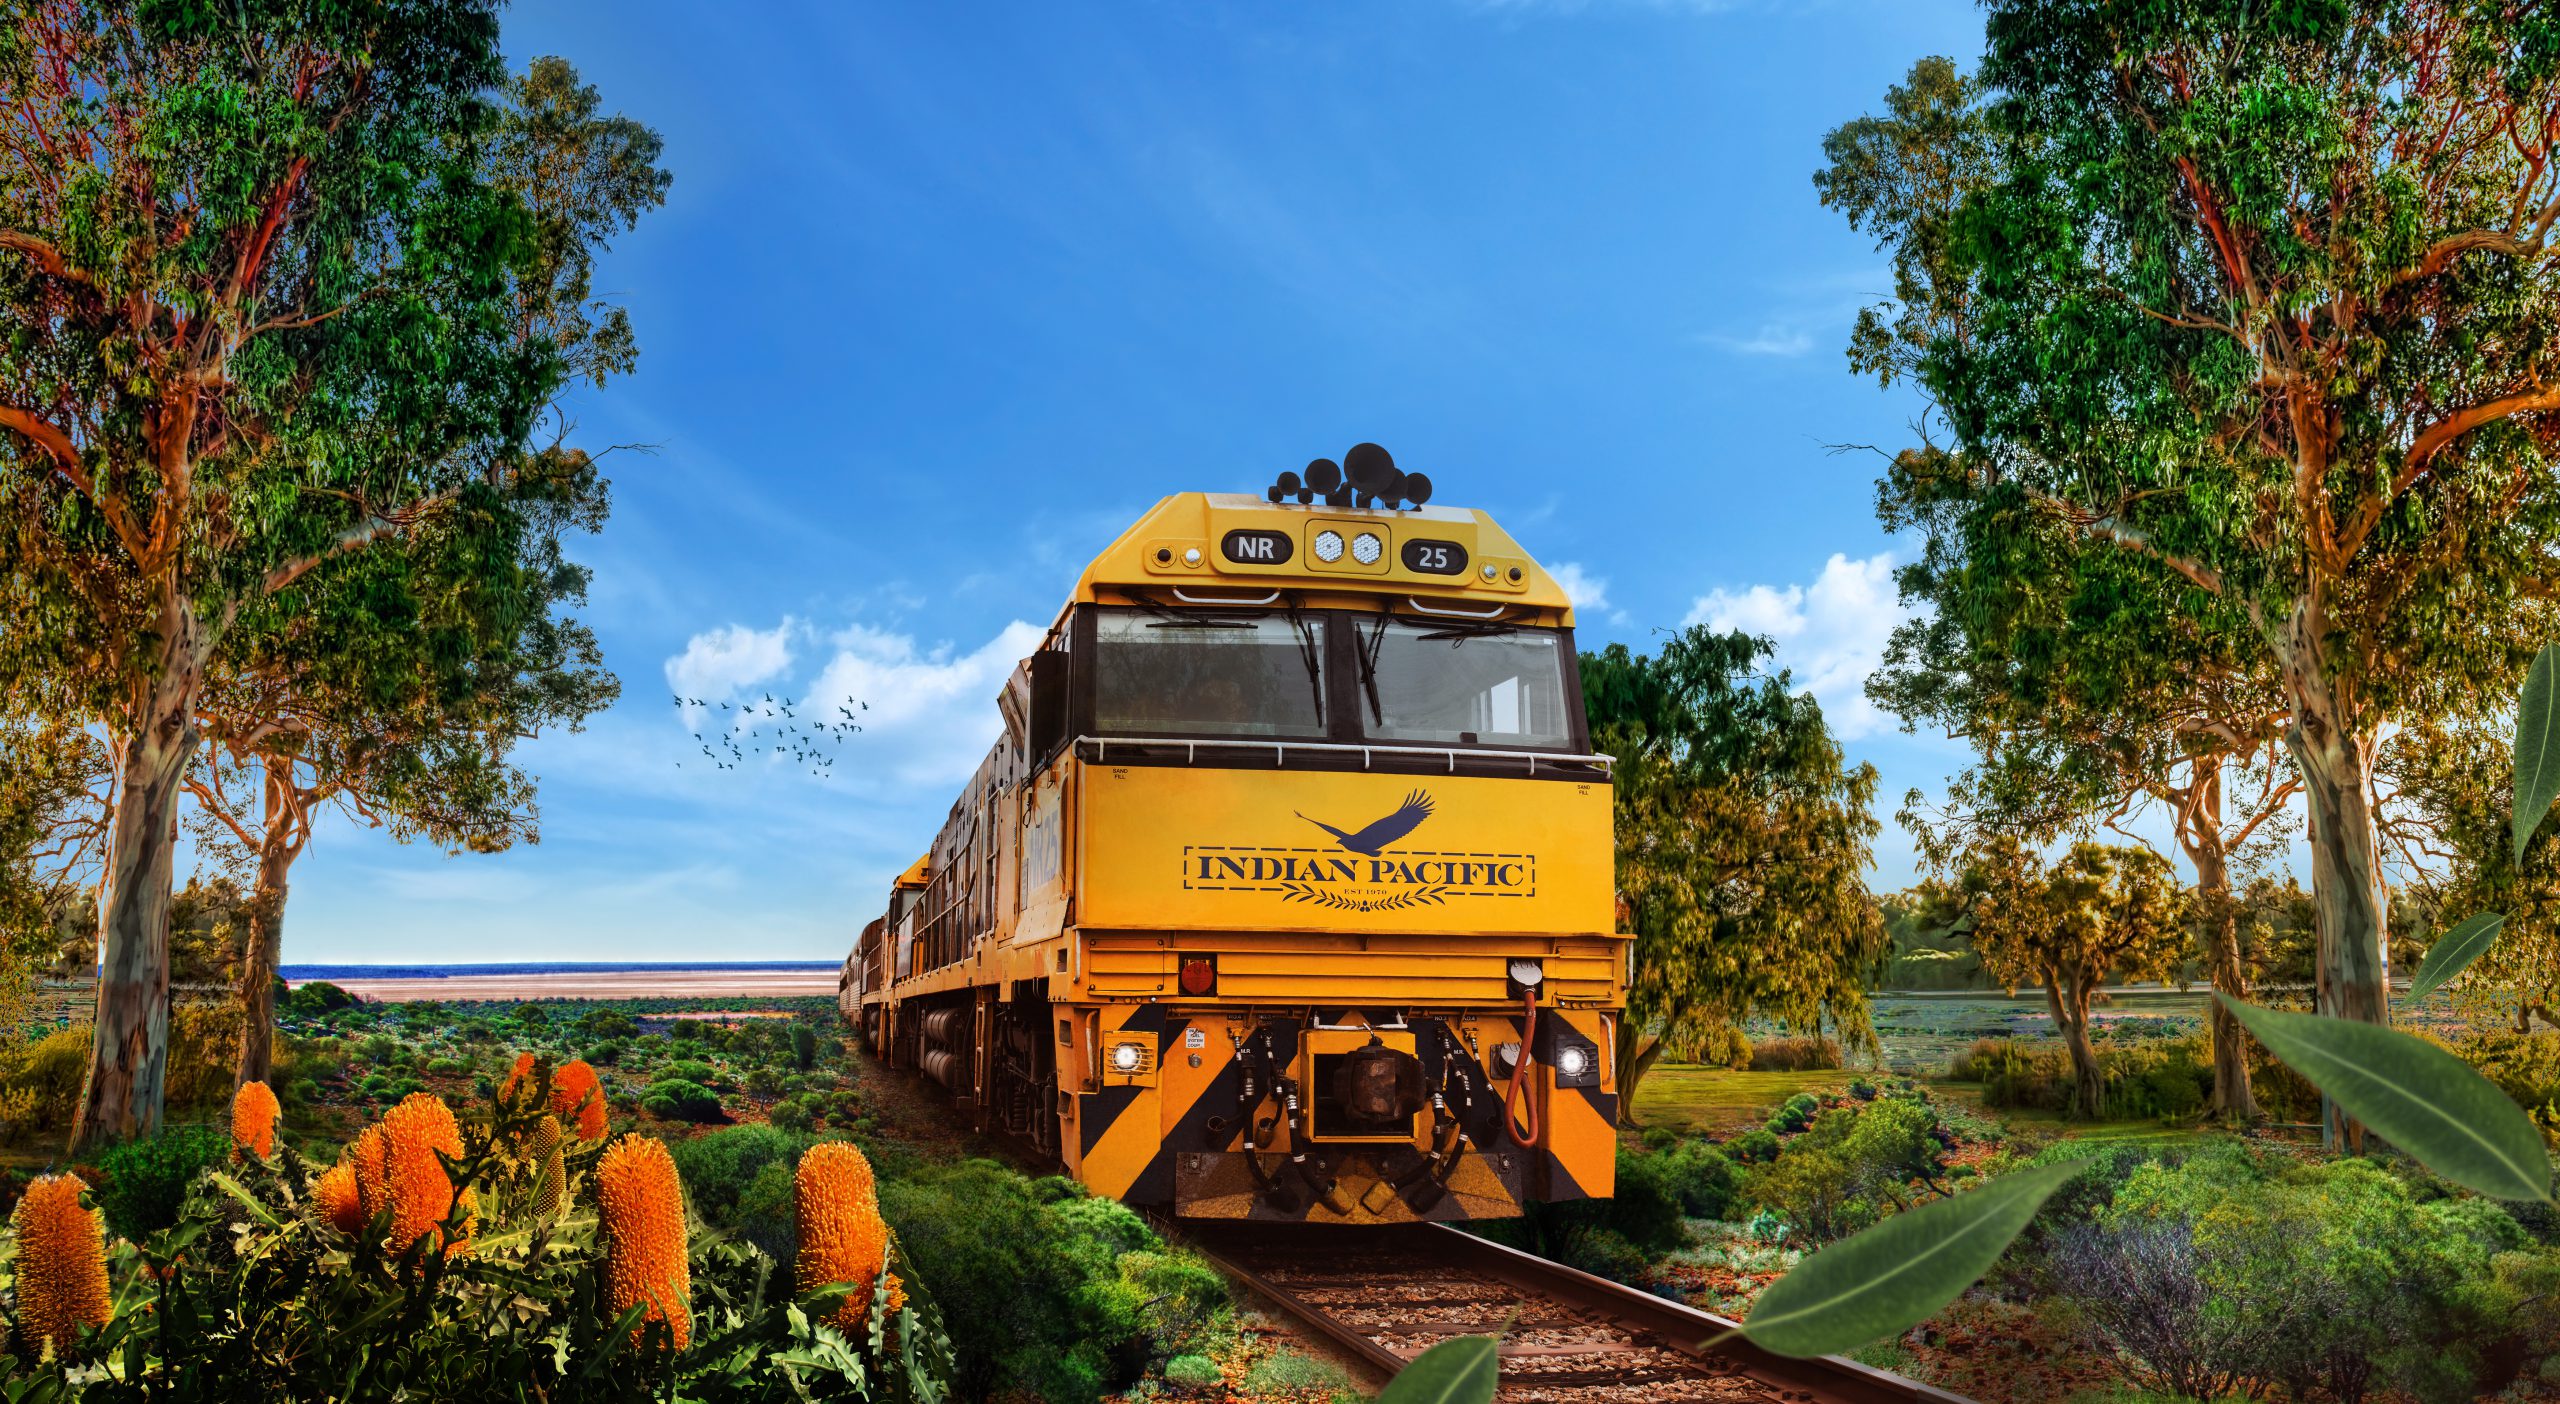 Combine a cruise on P&O's Pacific Explorer with iconic Indian Pacific rail journey including hotel stay in Perth from $4699 per person